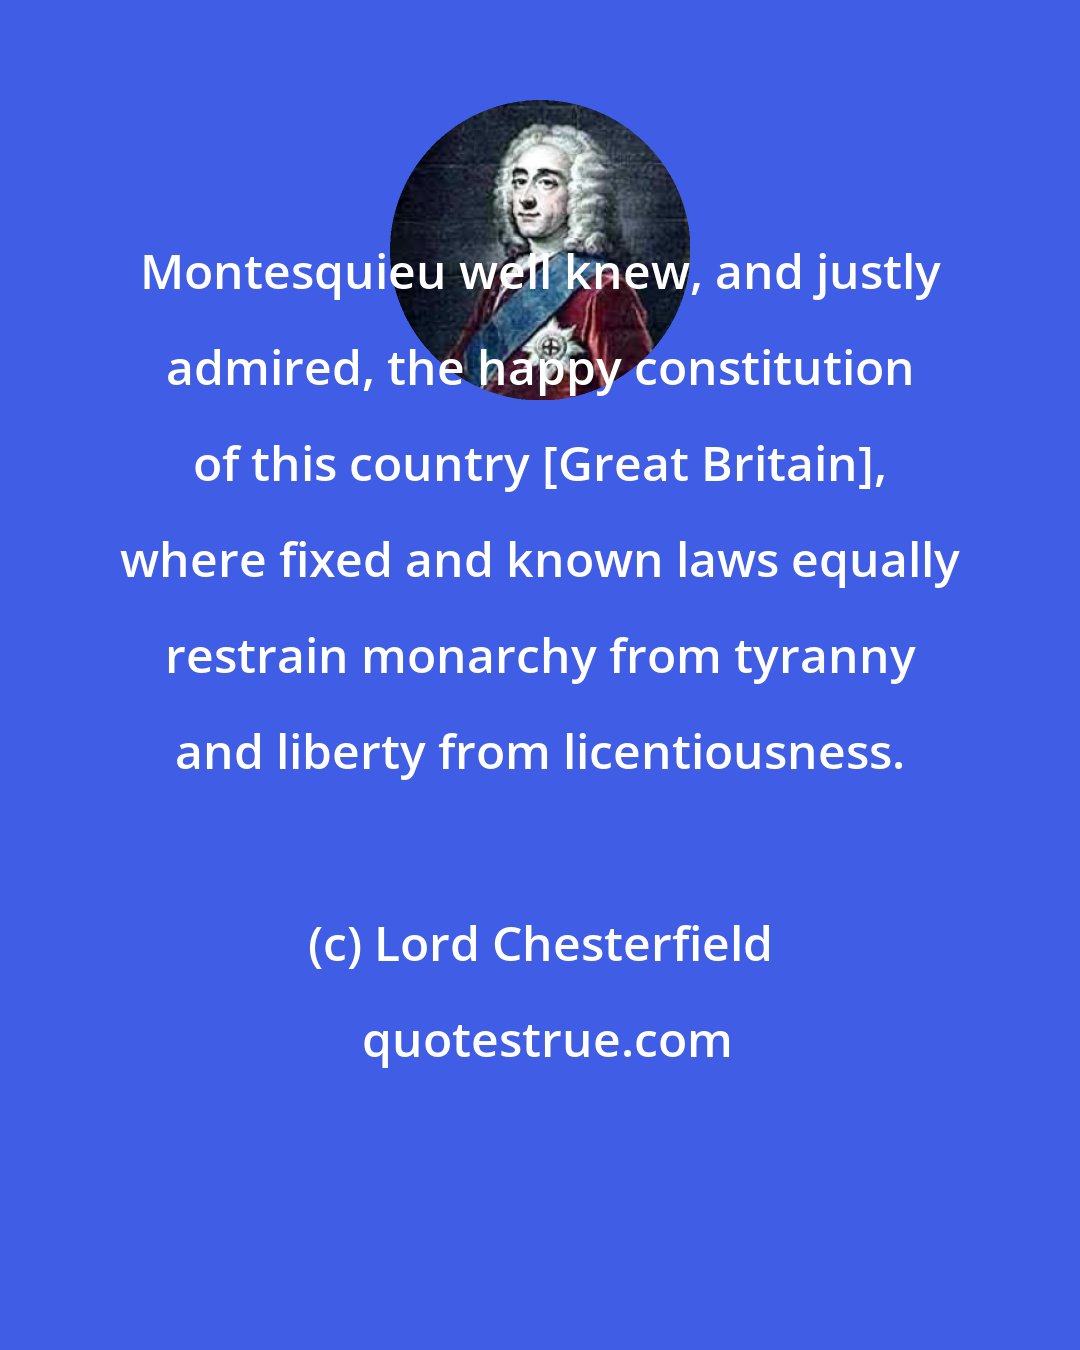 Lord Chesterfield: Montesquieu well knew, and justly admired, the happy constitution of this country [Great Britain], where fixed and known laws equally restrain monarchy from tyranny and liberty from licentiousness.